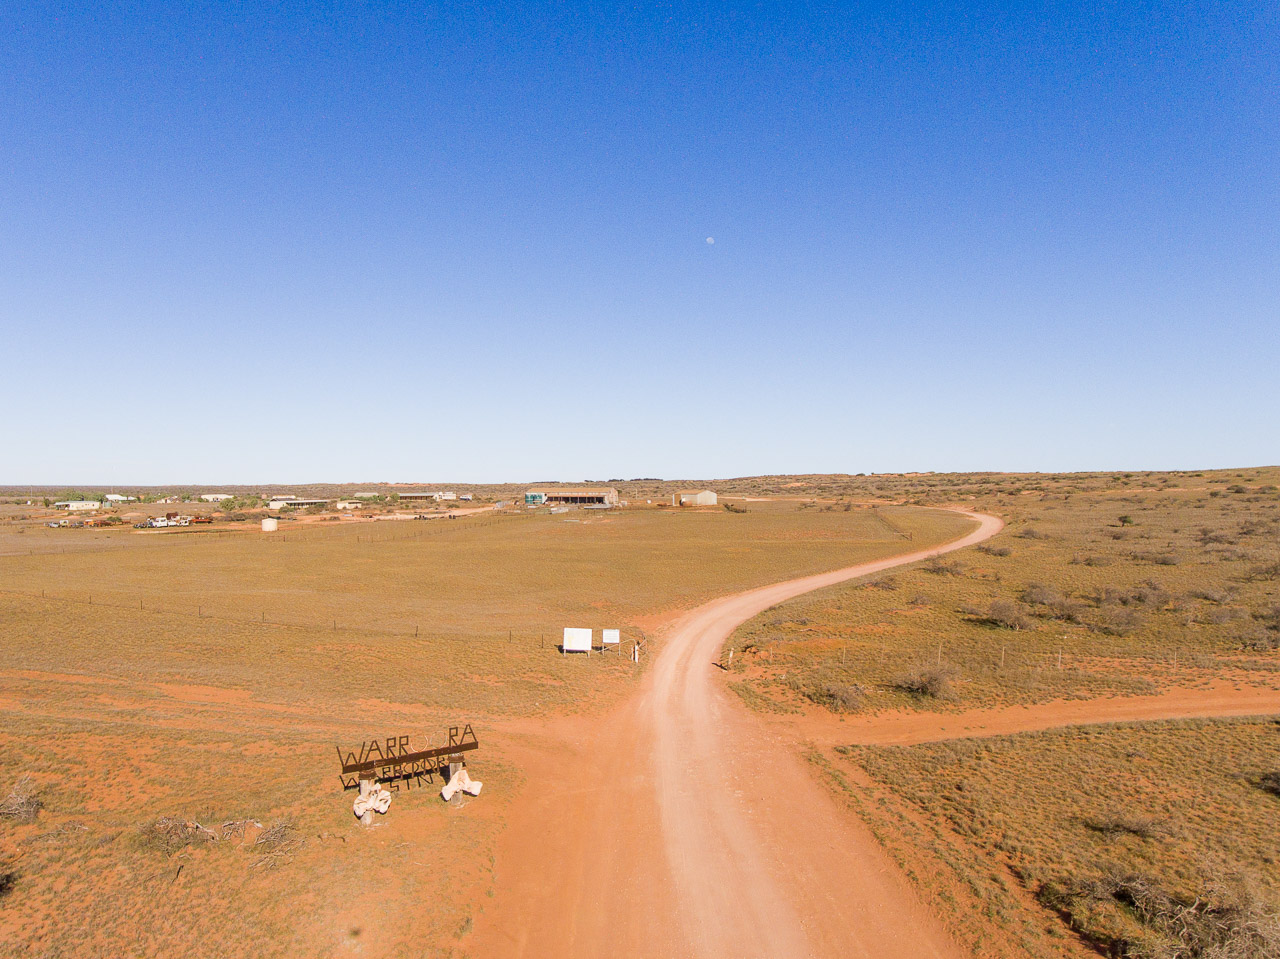 Aerial image of the homestead and station buildings at Warroora, WA